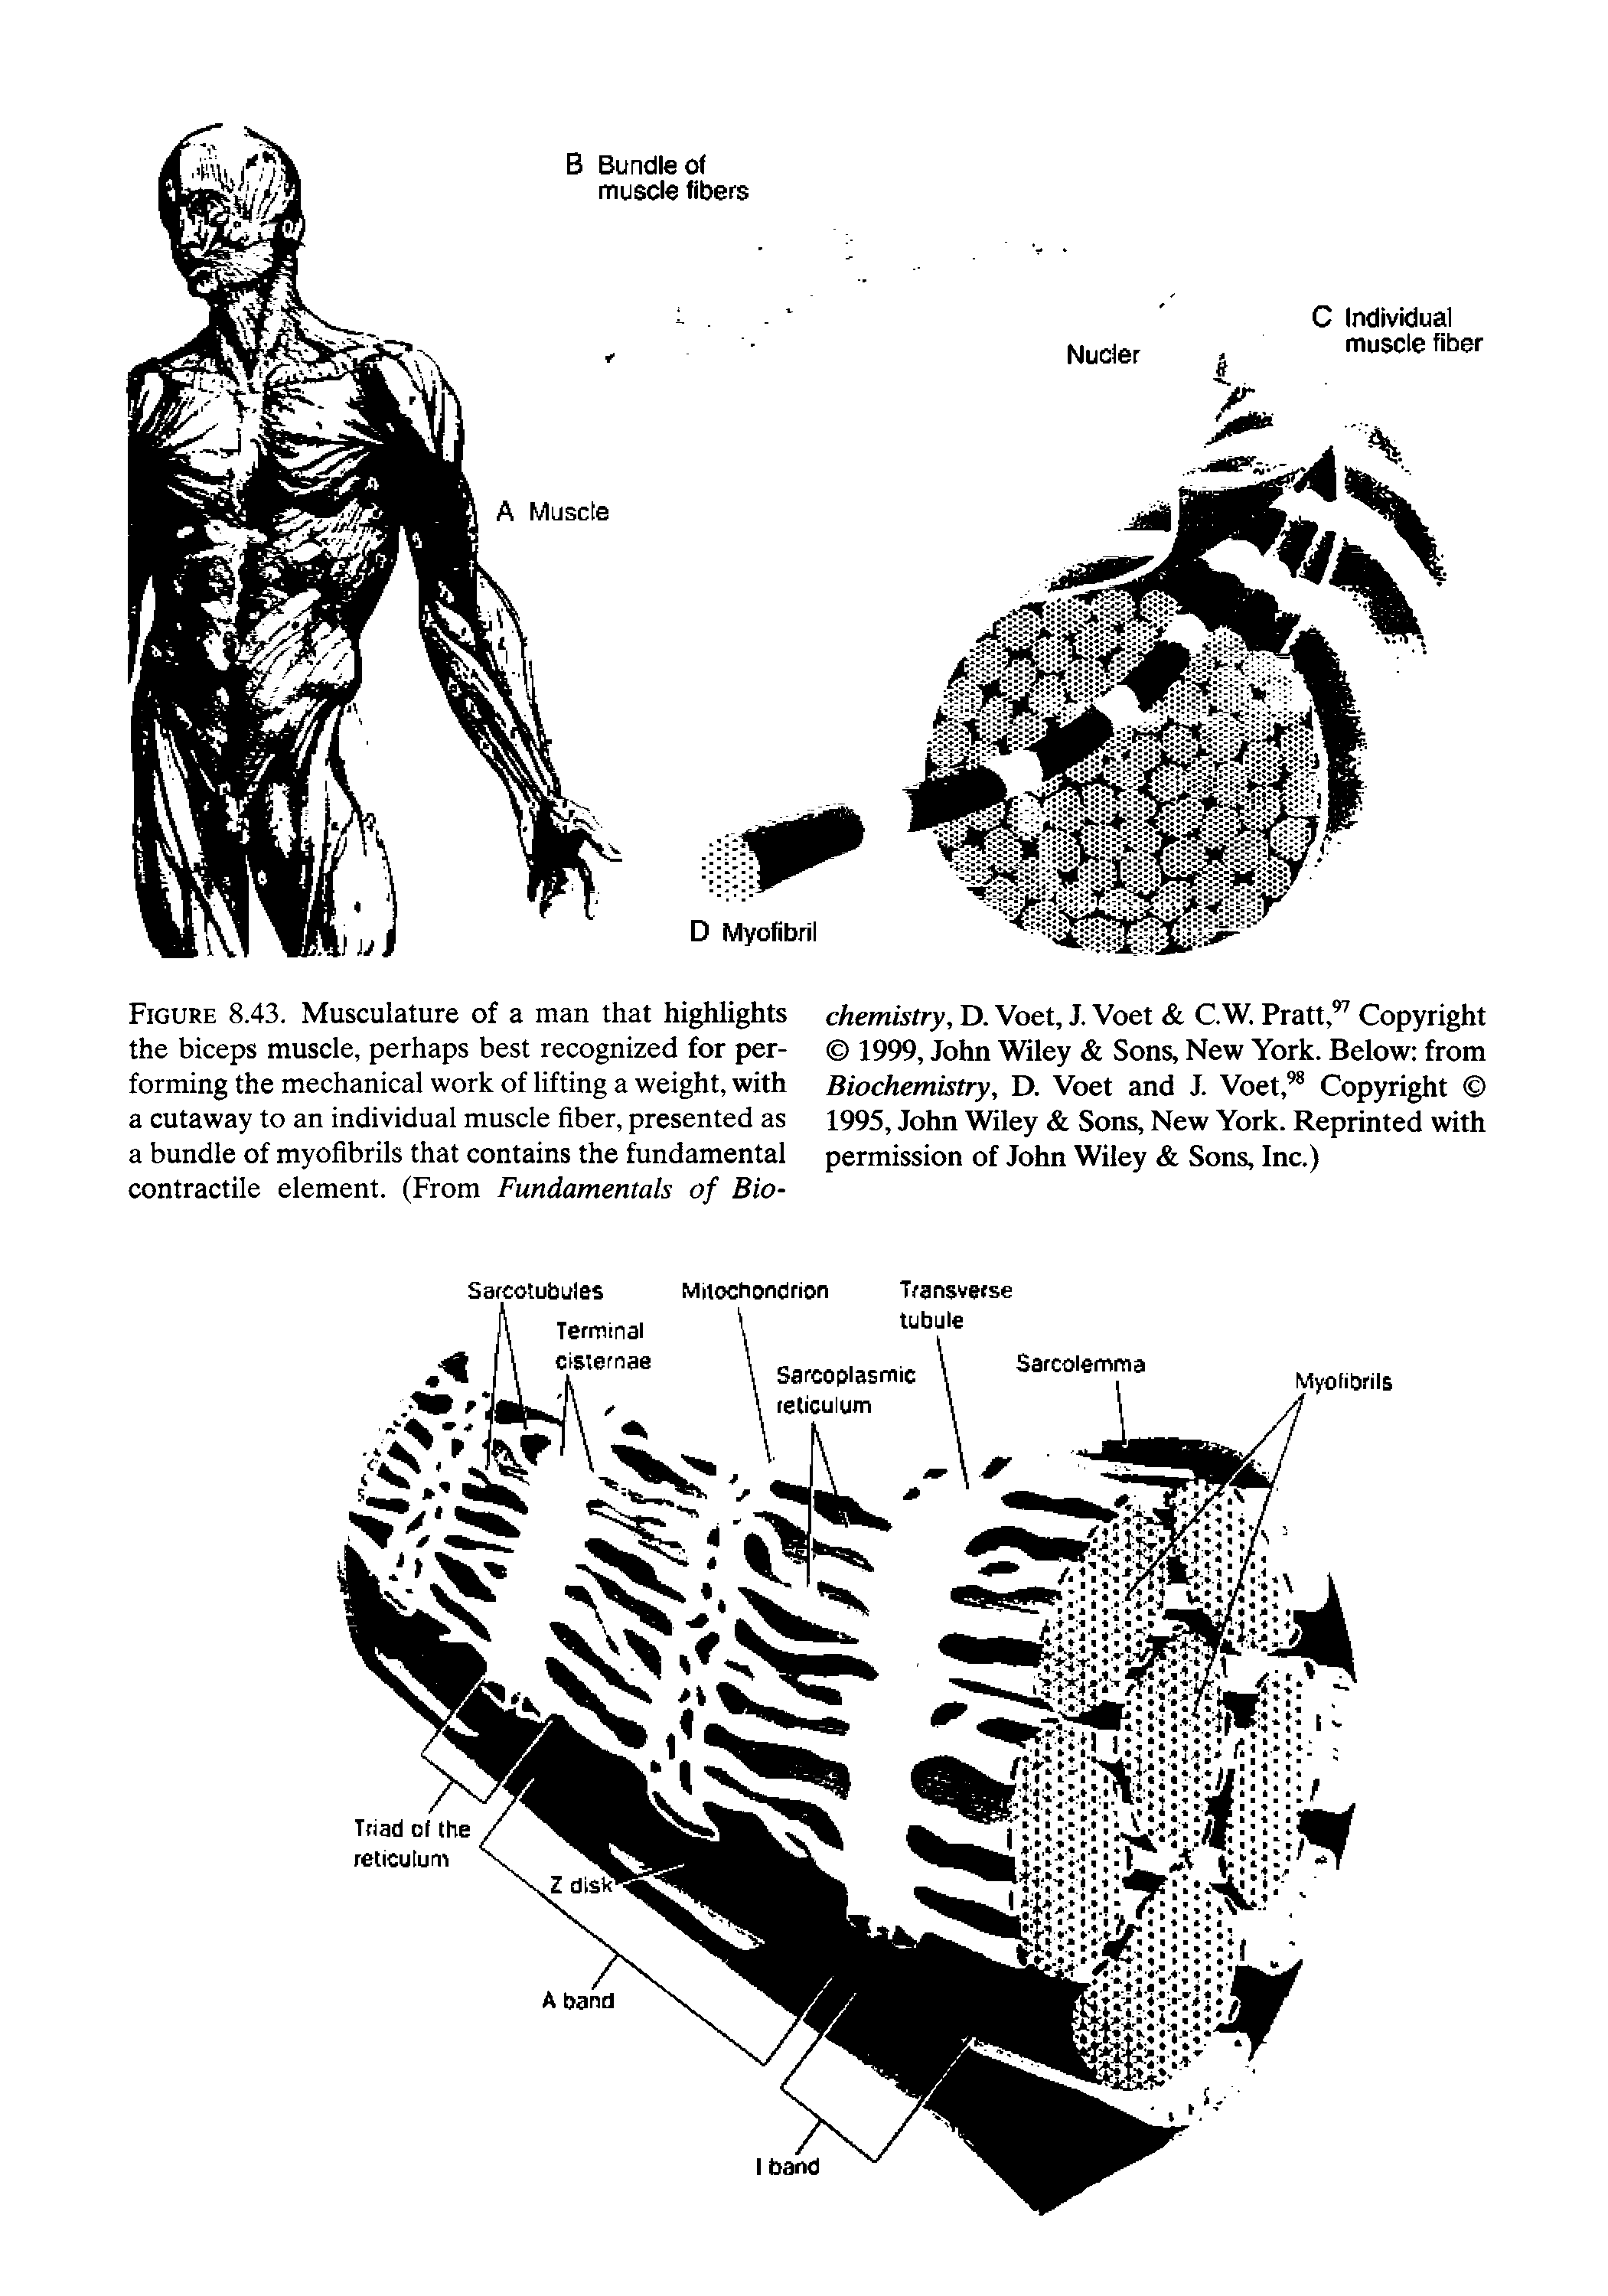 Figure 8.43. Musculature of a man that highlights the biceps muscle, perhaps best recognized for performing the mechanical work of lifting a weight, with a cutaway to an individual muscle fiber, presented as a bundle of myofibrils that contains the fundamental contractile element. (From Fundamentals of Bio-...